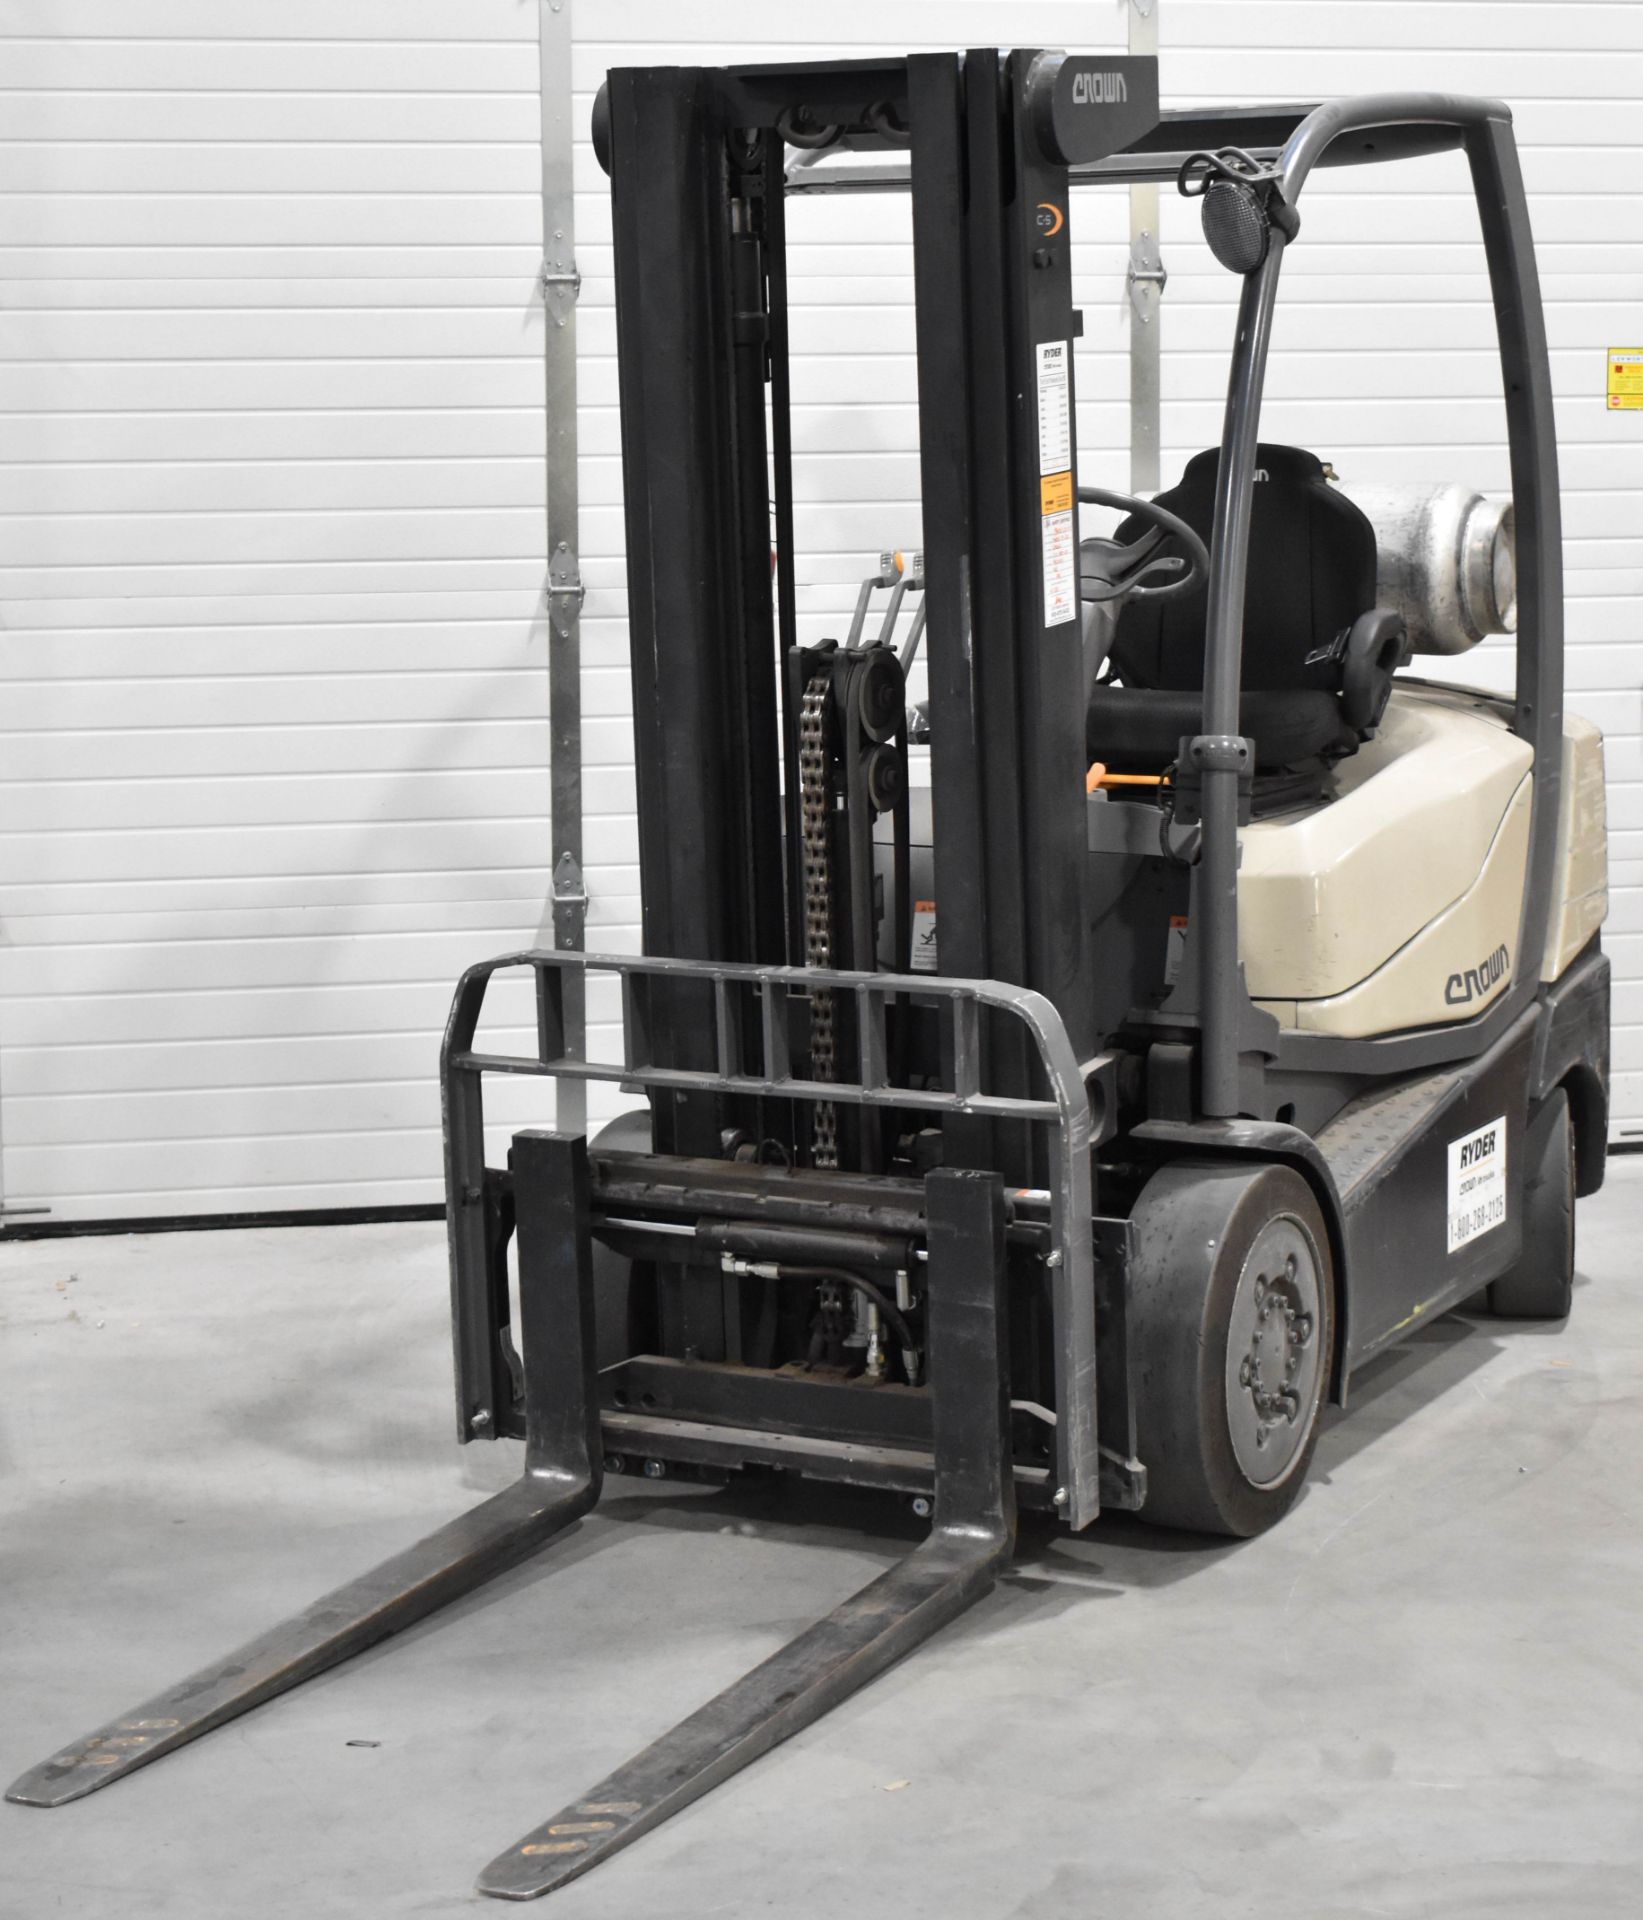 CROWN (2016) C-5 1000-50 LPG COUNTERBALANCE FORKLIFT WITH 4,600 LB CAPACITY, 3-STAGE MAST, 188" MAX